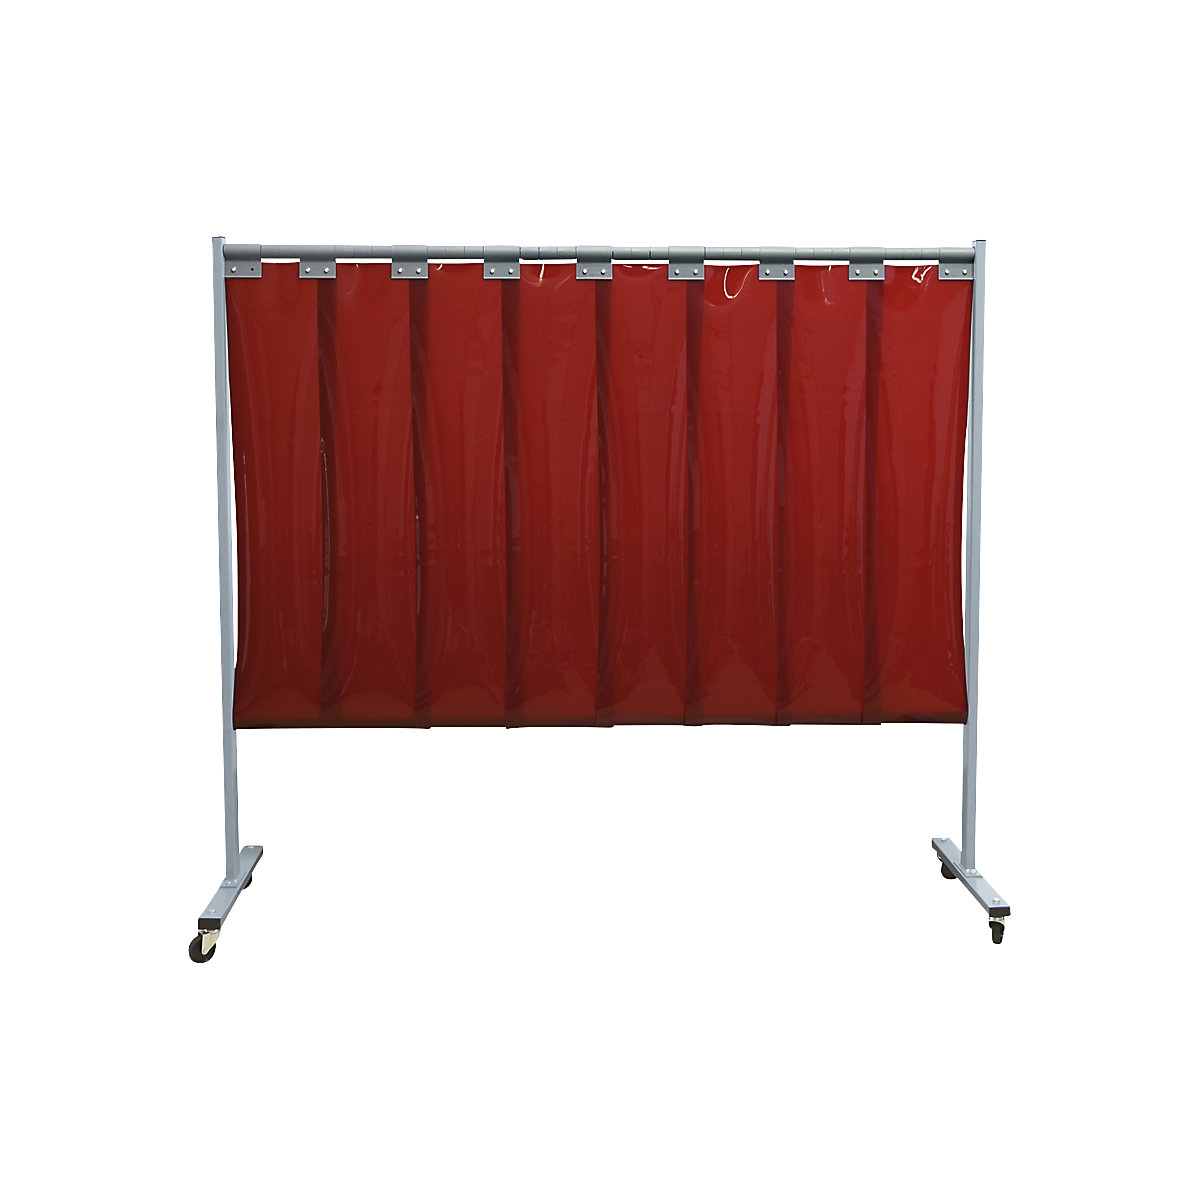 Mobile welding protection screen, single unit design, HxW 1900 x 2100 mm, with lamellar curtain, red